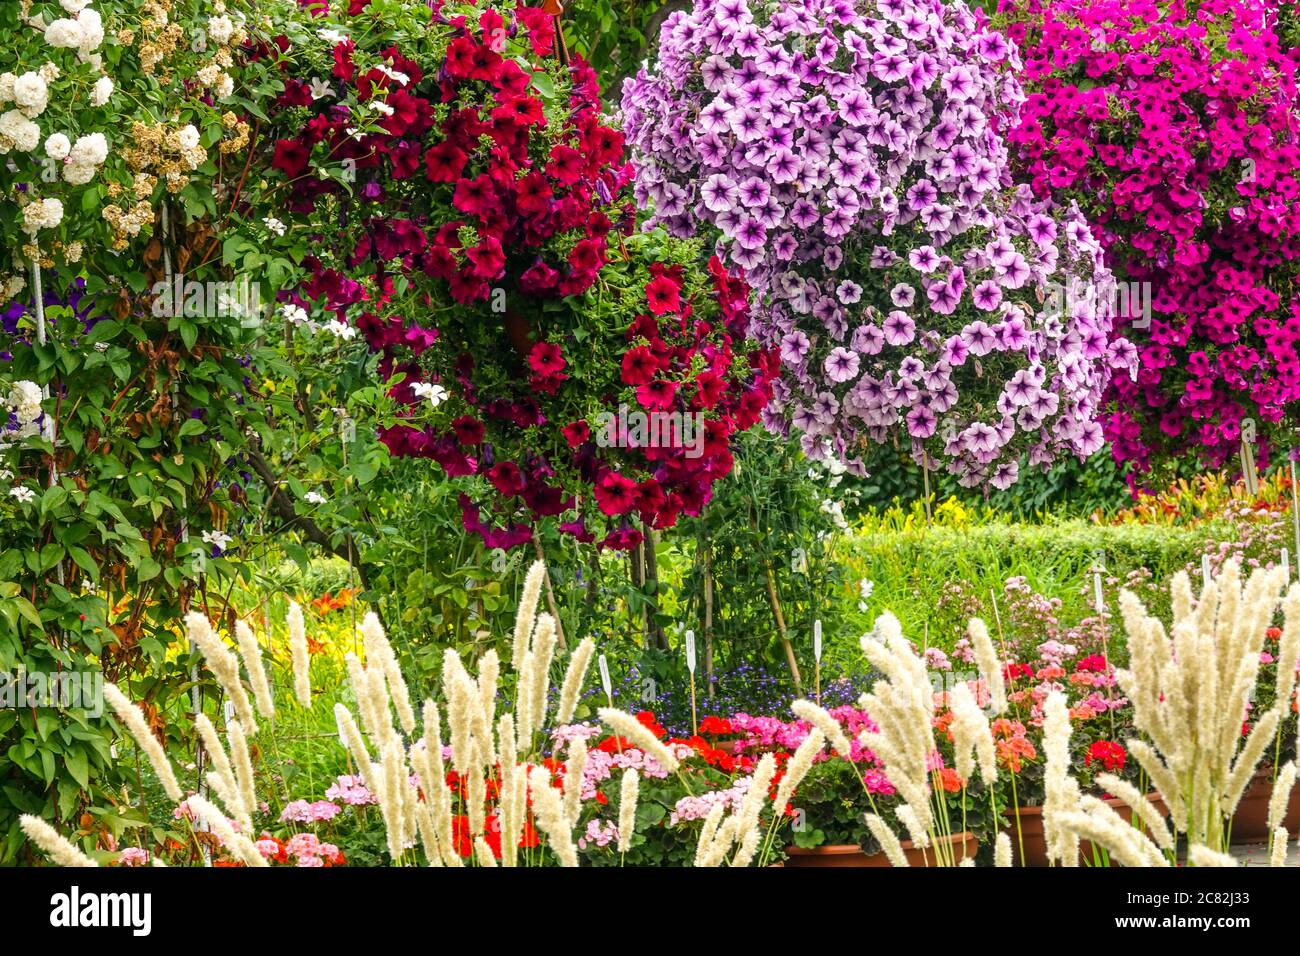 Colorful flowers hanging in pots in july garden petunias Stock Photo